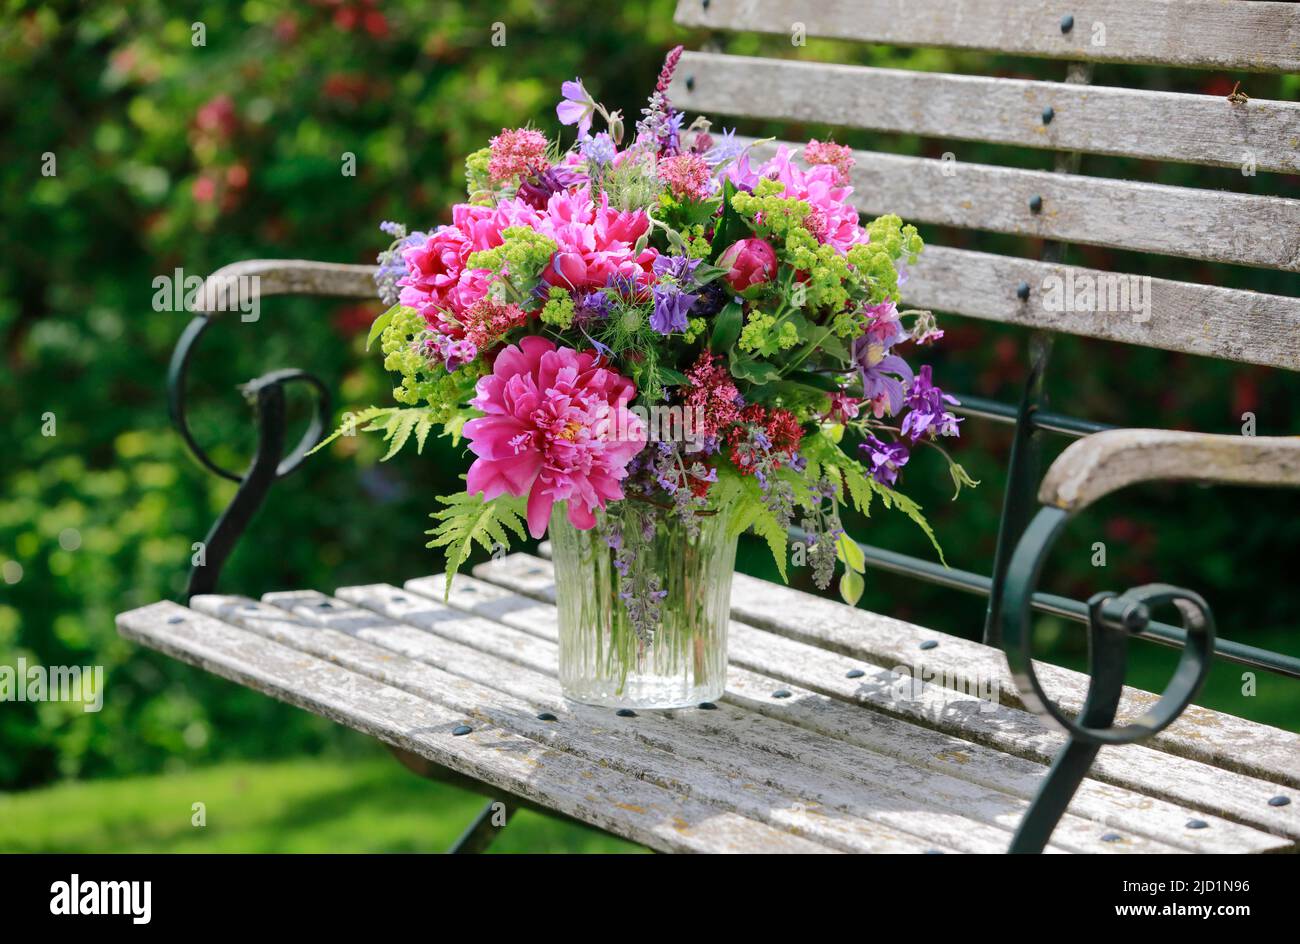 Colourful bouquet in red, pink and violet shades with peonies and columbines, stands in glass vase on decorative wooden garden bench Stock Photo